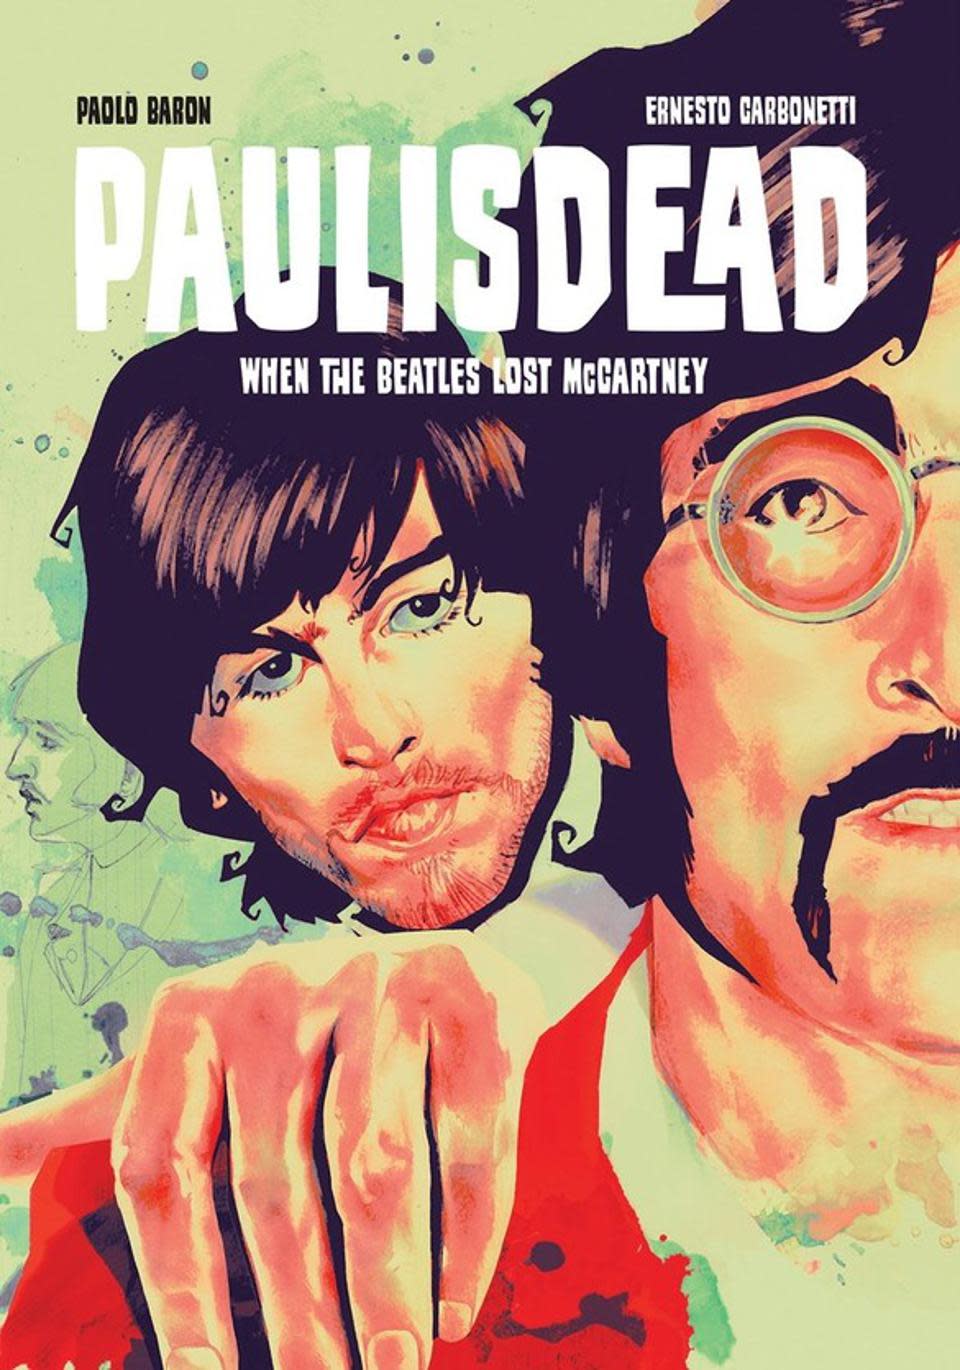 In 2020 Image Comics released the ‘Paul is Dead’ comic, based on the decades old conspiracy theoryImage Comics/Paolo Baron and Ernesto Carbonetti